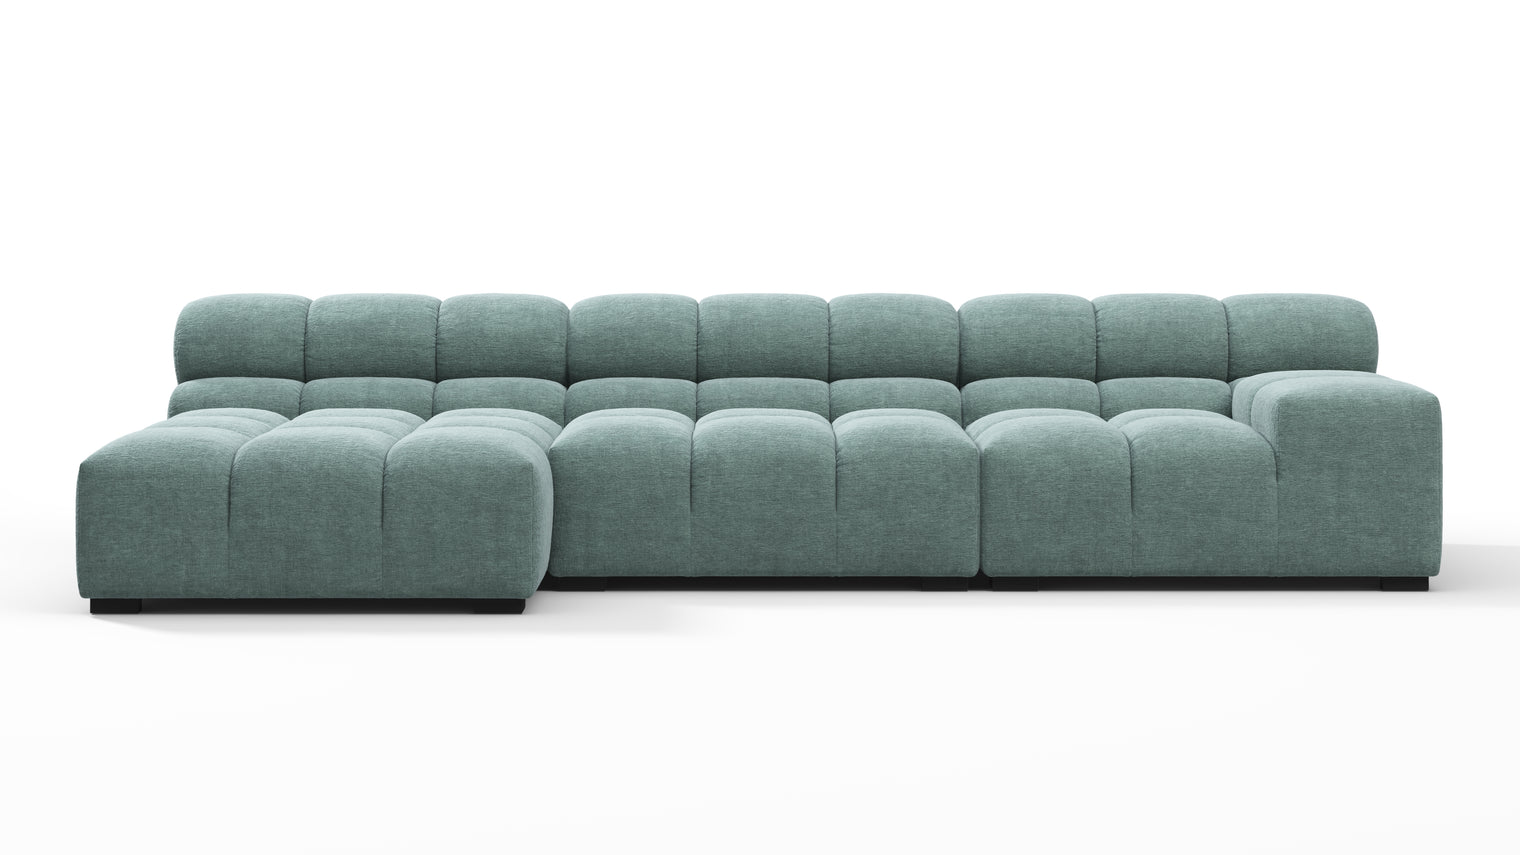 SUPERIOR COMFORT | Designed with the easy-going, informal ethos of the 1970s in mind, the Tufted modules are generously proportioned, coming together in a bench-like base with barely-there connections, allowing plenty of room for you to lean back and curl up in comfort.
